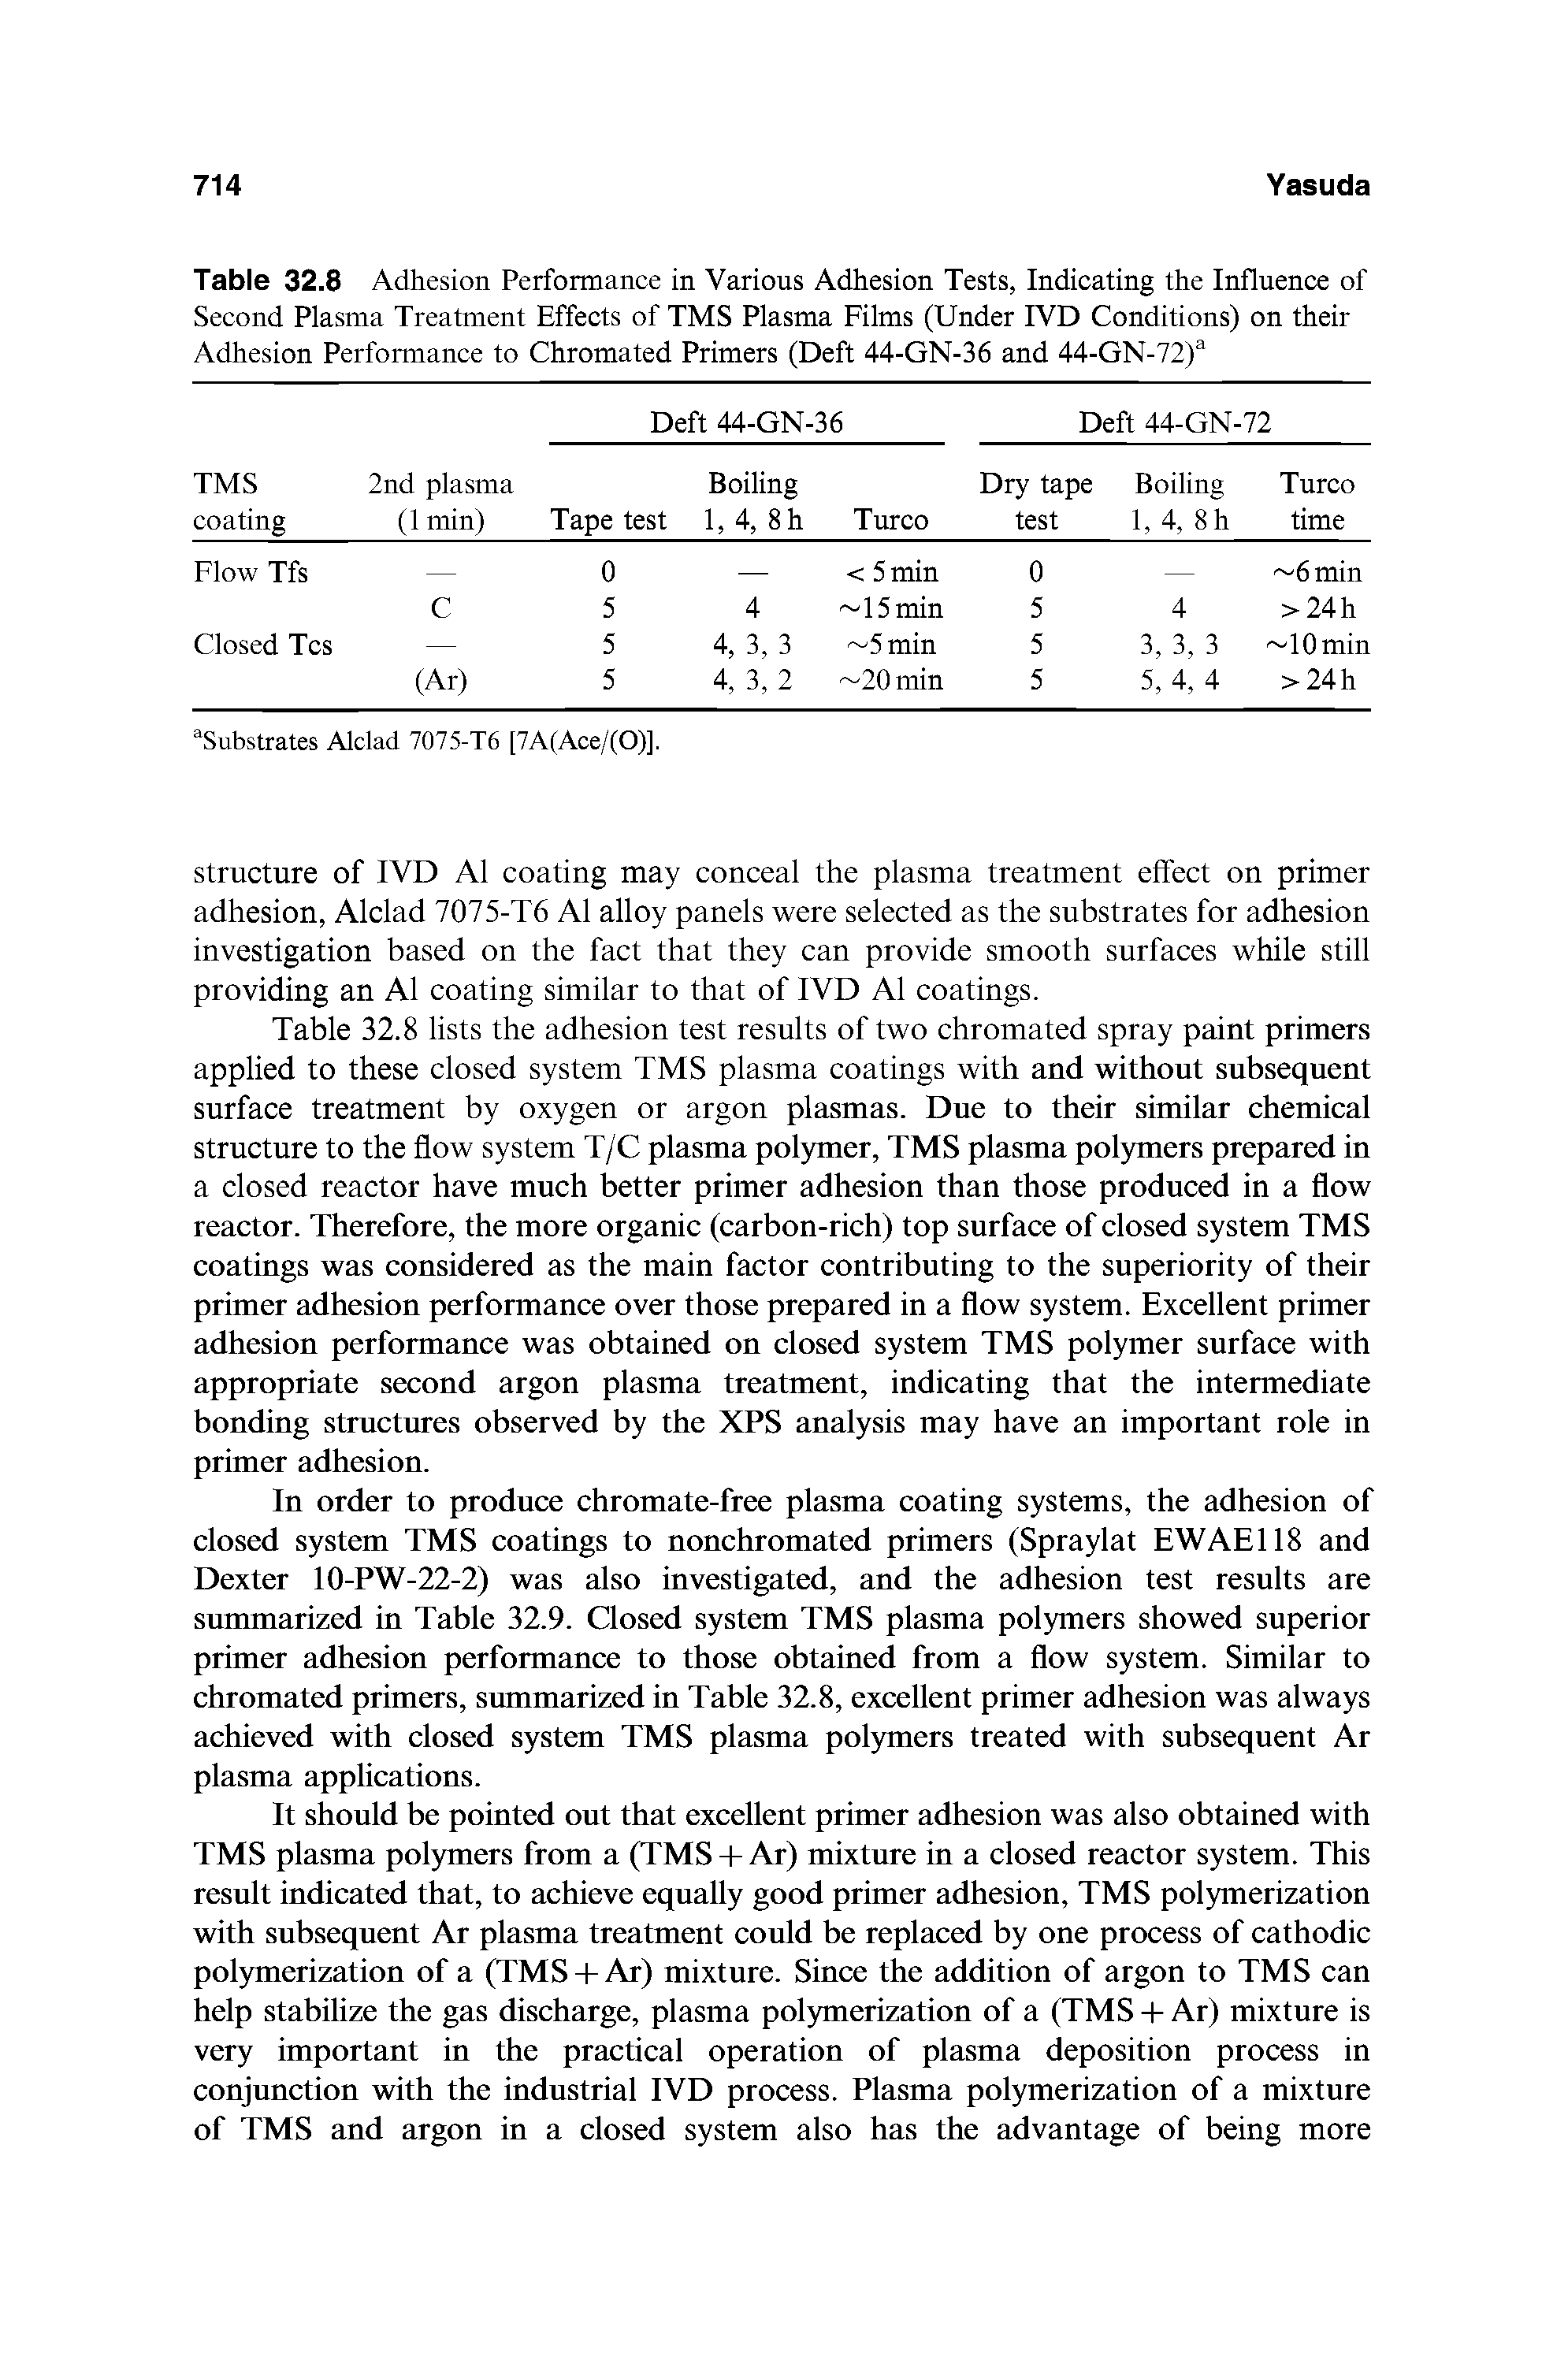 Table 32.8 Adhesion Performance in Various Adhesion Tests, Indicating the Influence of Second Plasma Treatment Effects of TMS Plasma Films (Under IVD Conditions) on their Adhesion Performance to Chromated Primers (Deft 44-GN-36 and 44-GN-72) ...